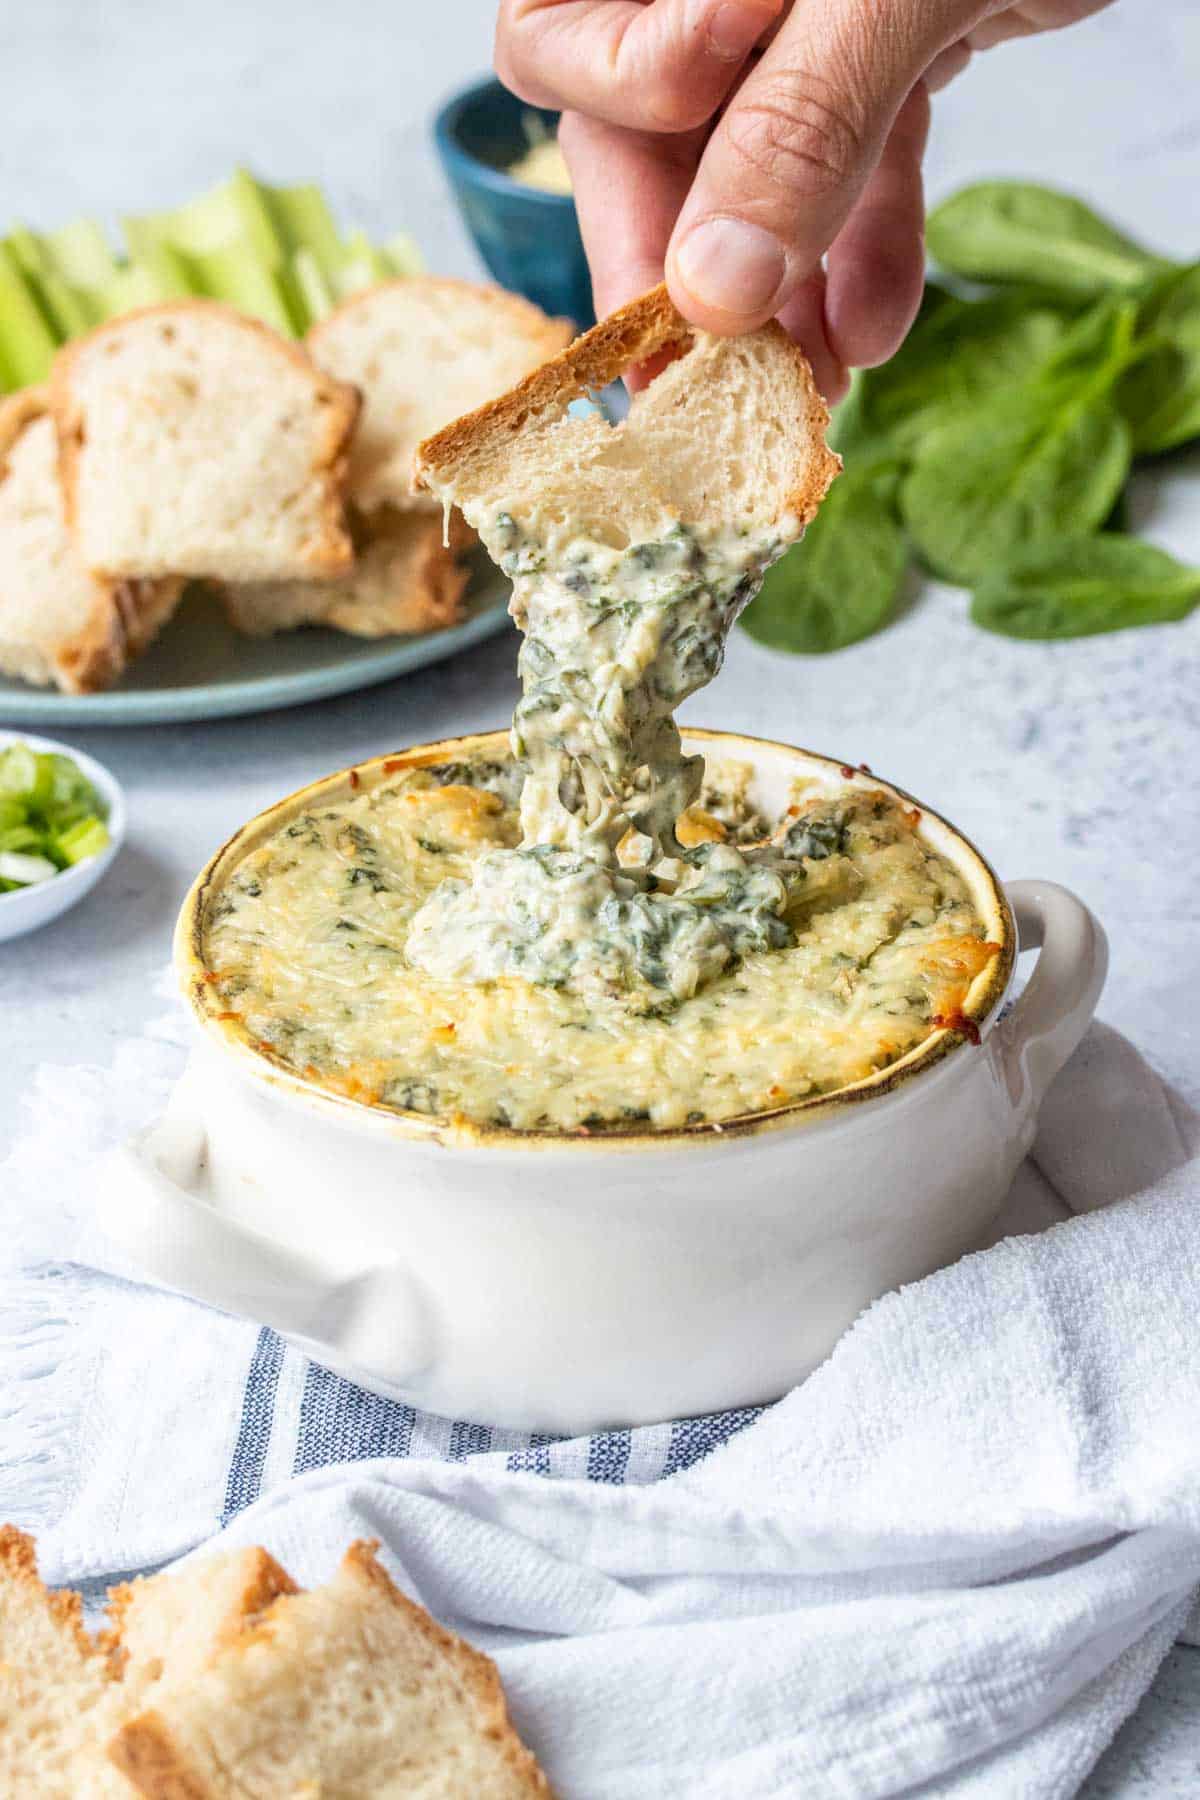 Hand dipping carrot piece in spinach artichoke dip